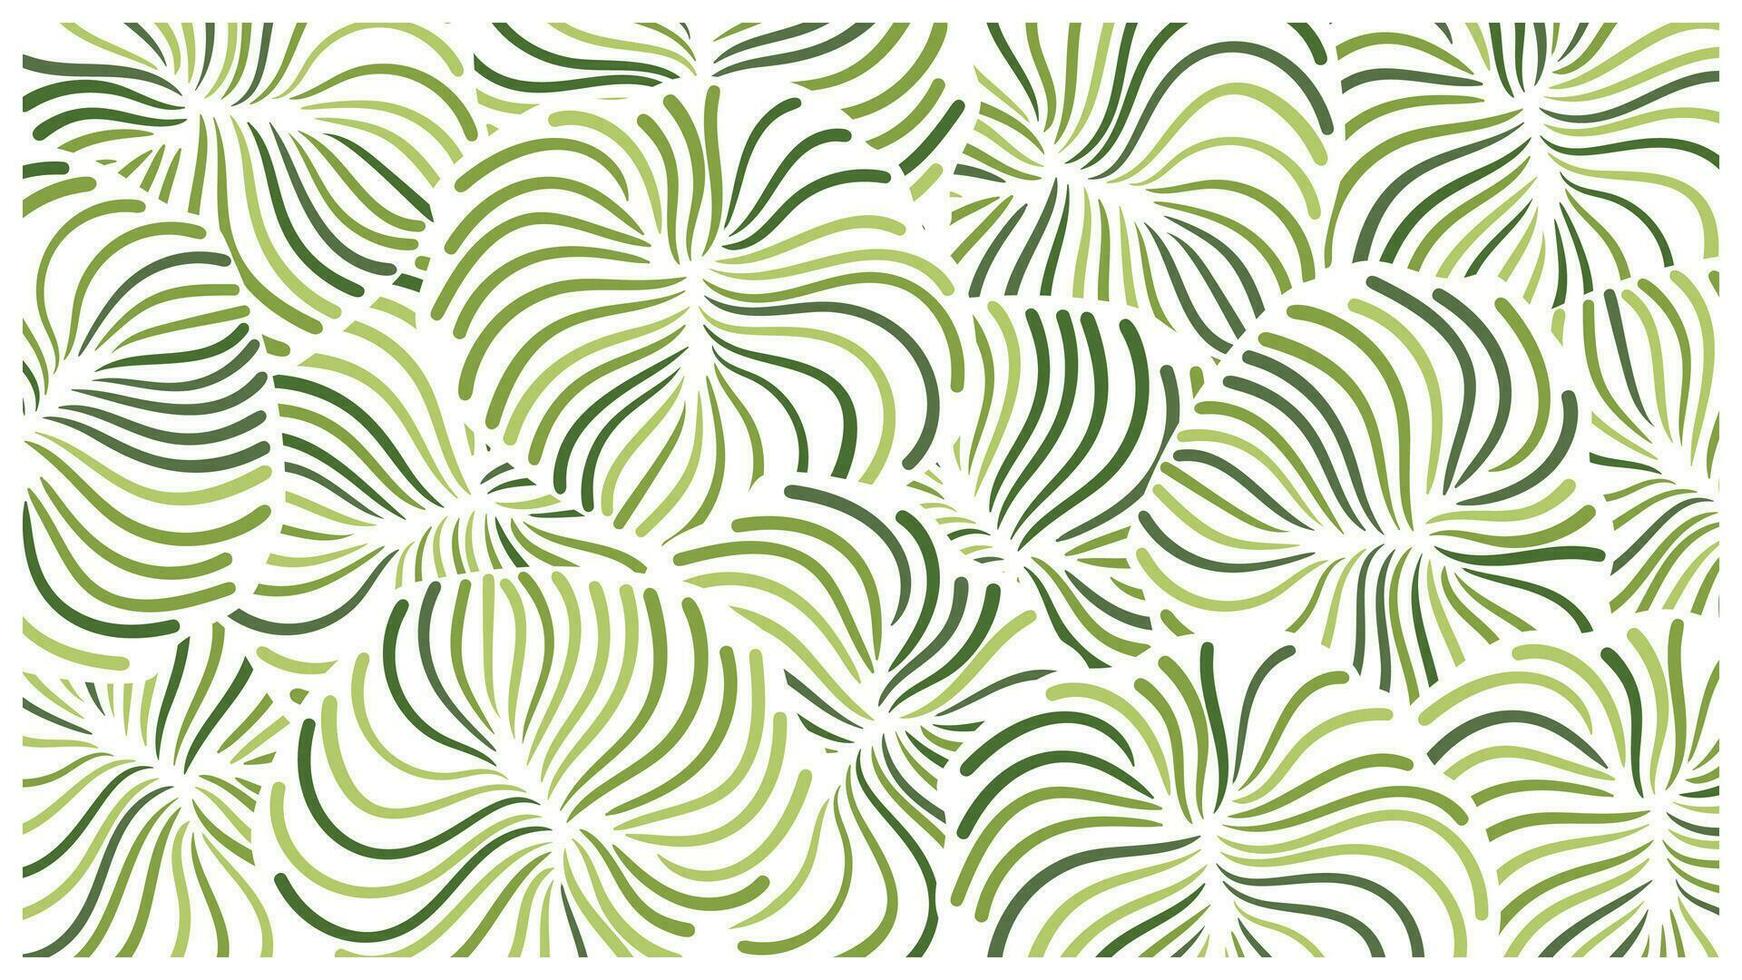 Abstract botanical art background vector. Natural hand drawn pattern design with leaves branch. Simple contemporary style illustrated Design for fabric, print, cover, banner, wallpaper. vector